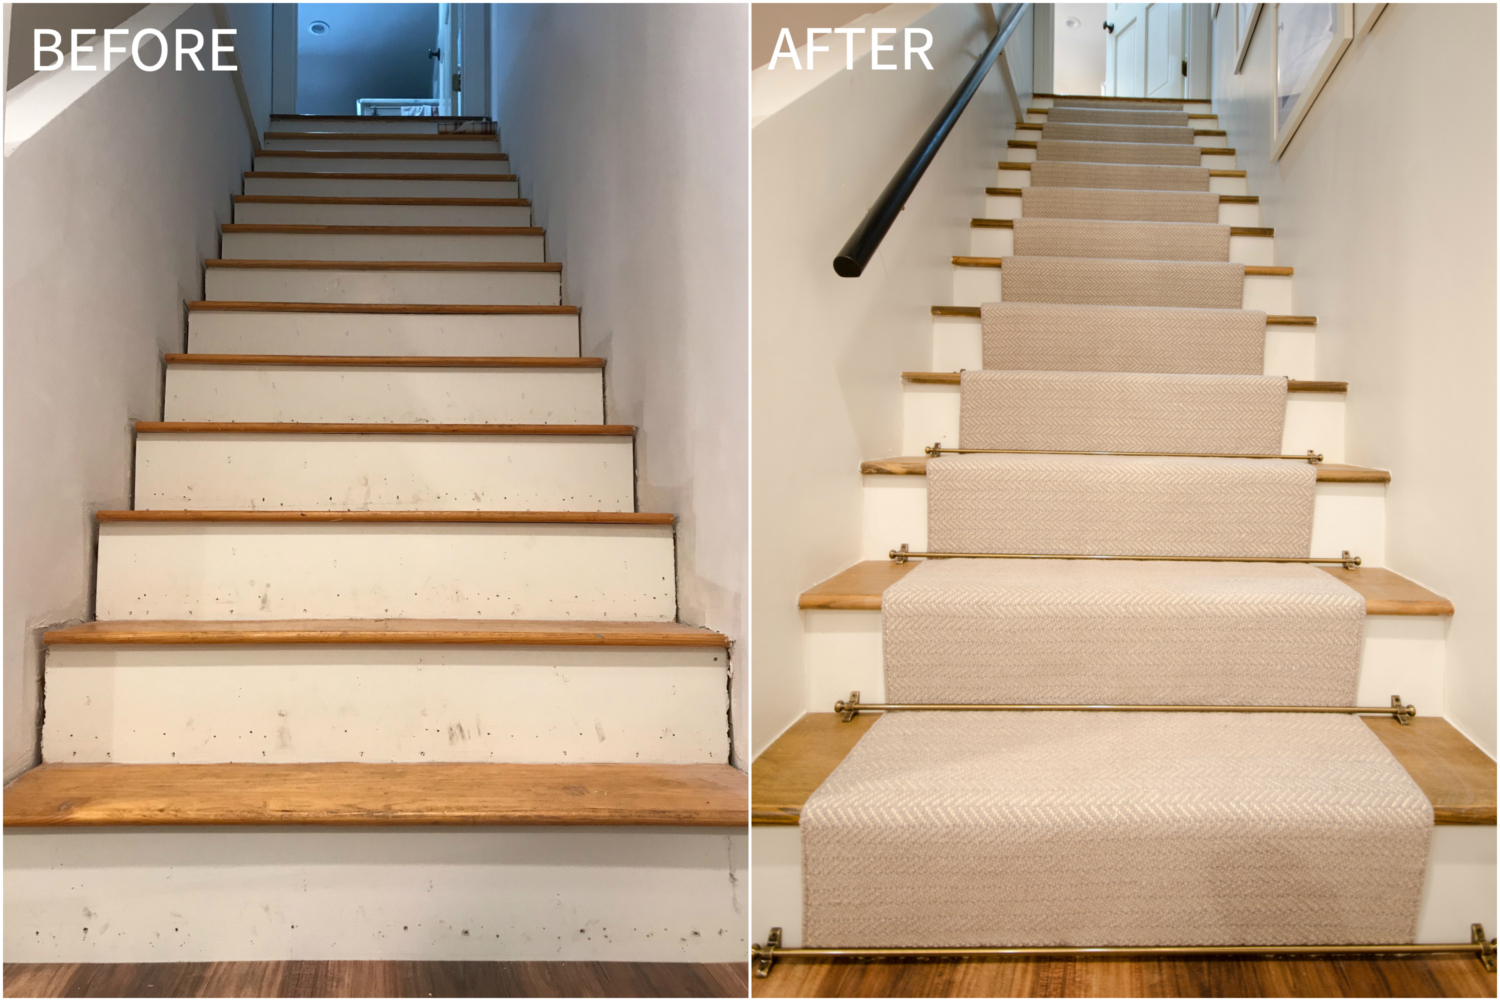 An easy tutorial showing you how to install a stair runner yourself!